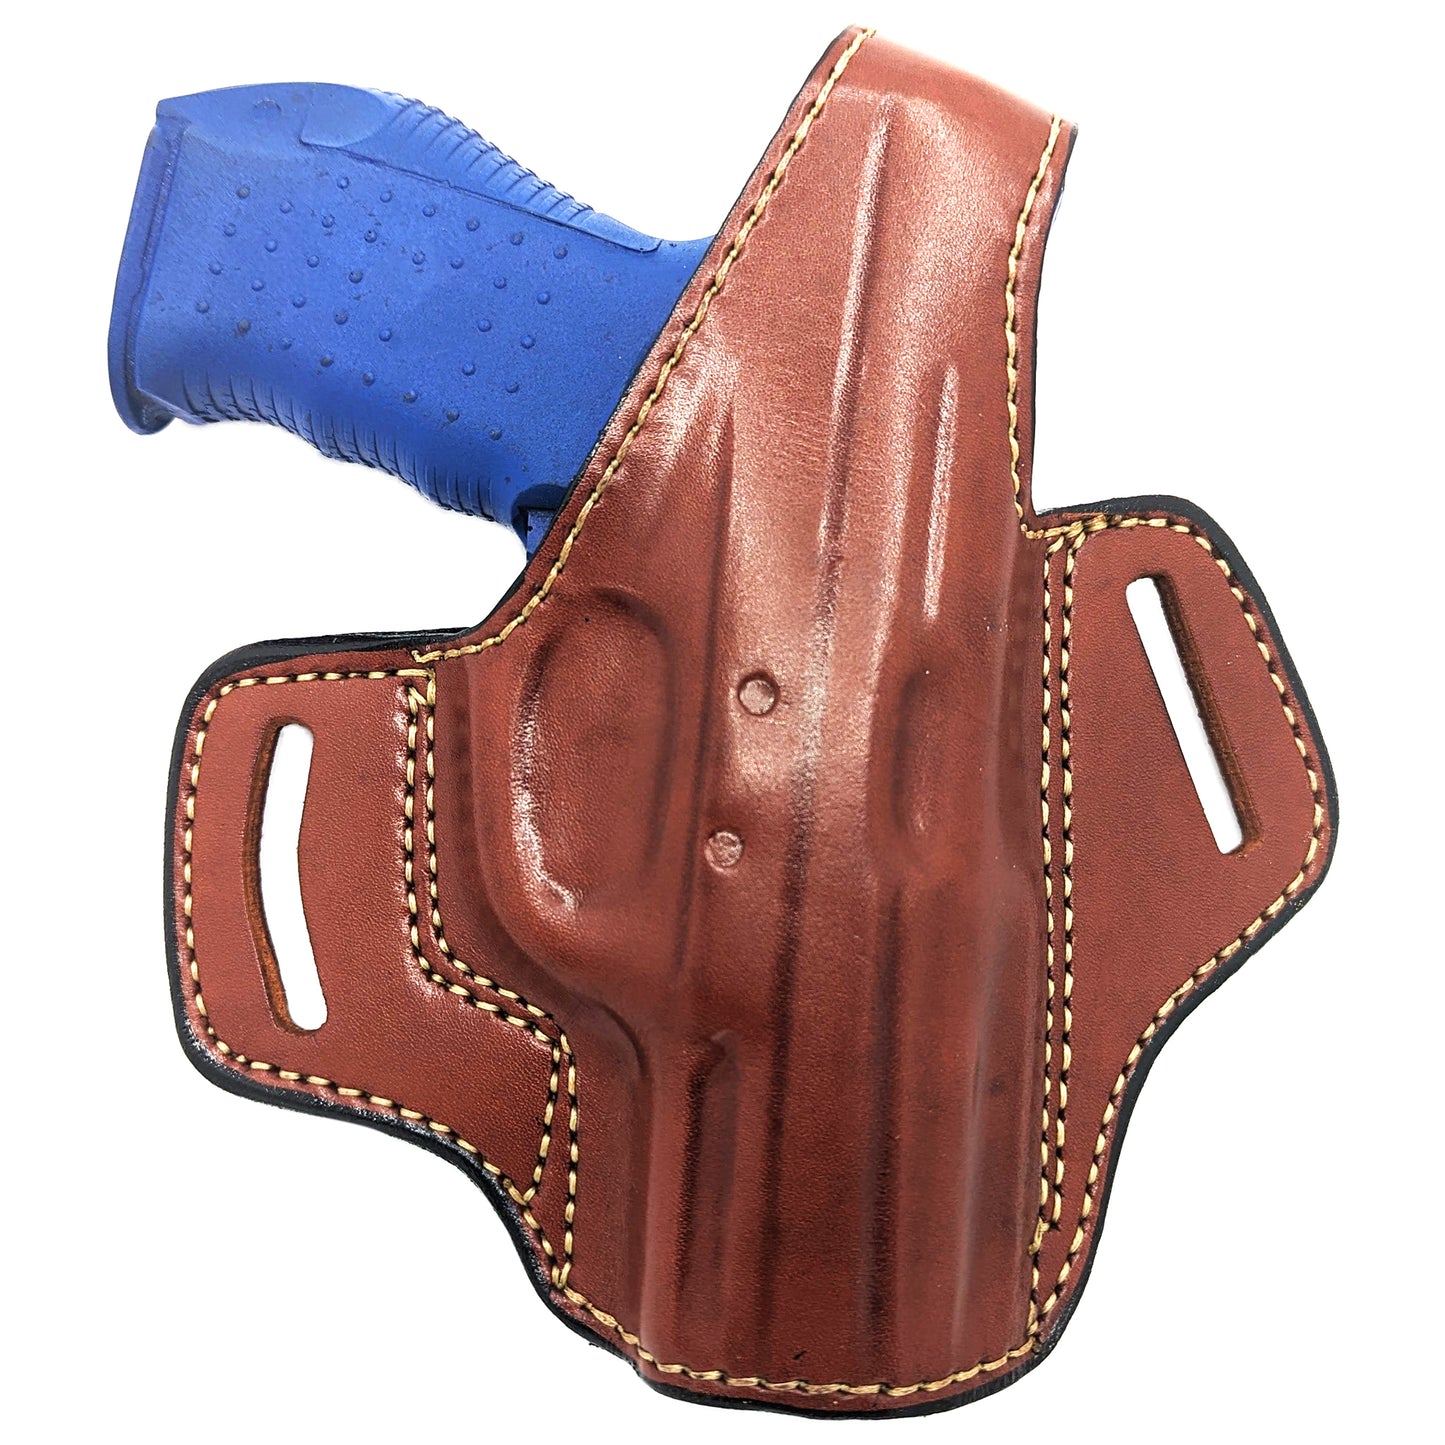 Smith & Wesson SW99 OWB Right Hand Thumb Break Right Hand Leather Belt Holster